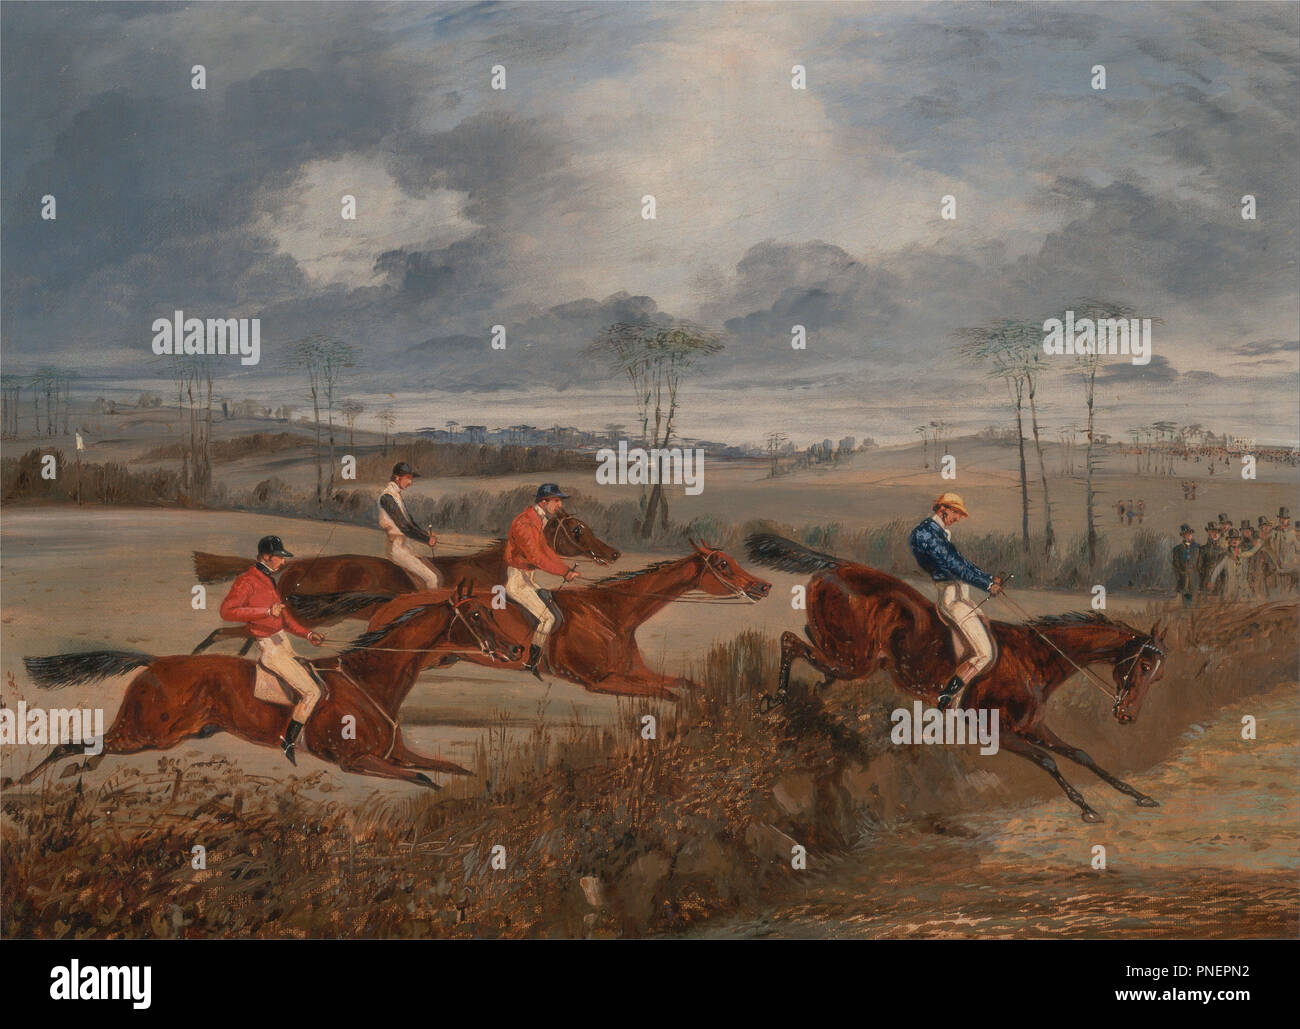 Scenes from a steeplechase: Taking a Hedge. Date/Period: Ca. 1845. Painting. Oil on canvas. Height: 254 mm (10 in); Width: 356 mm (14.01 in). Author: Henry Thomas Alken. Stock Photo